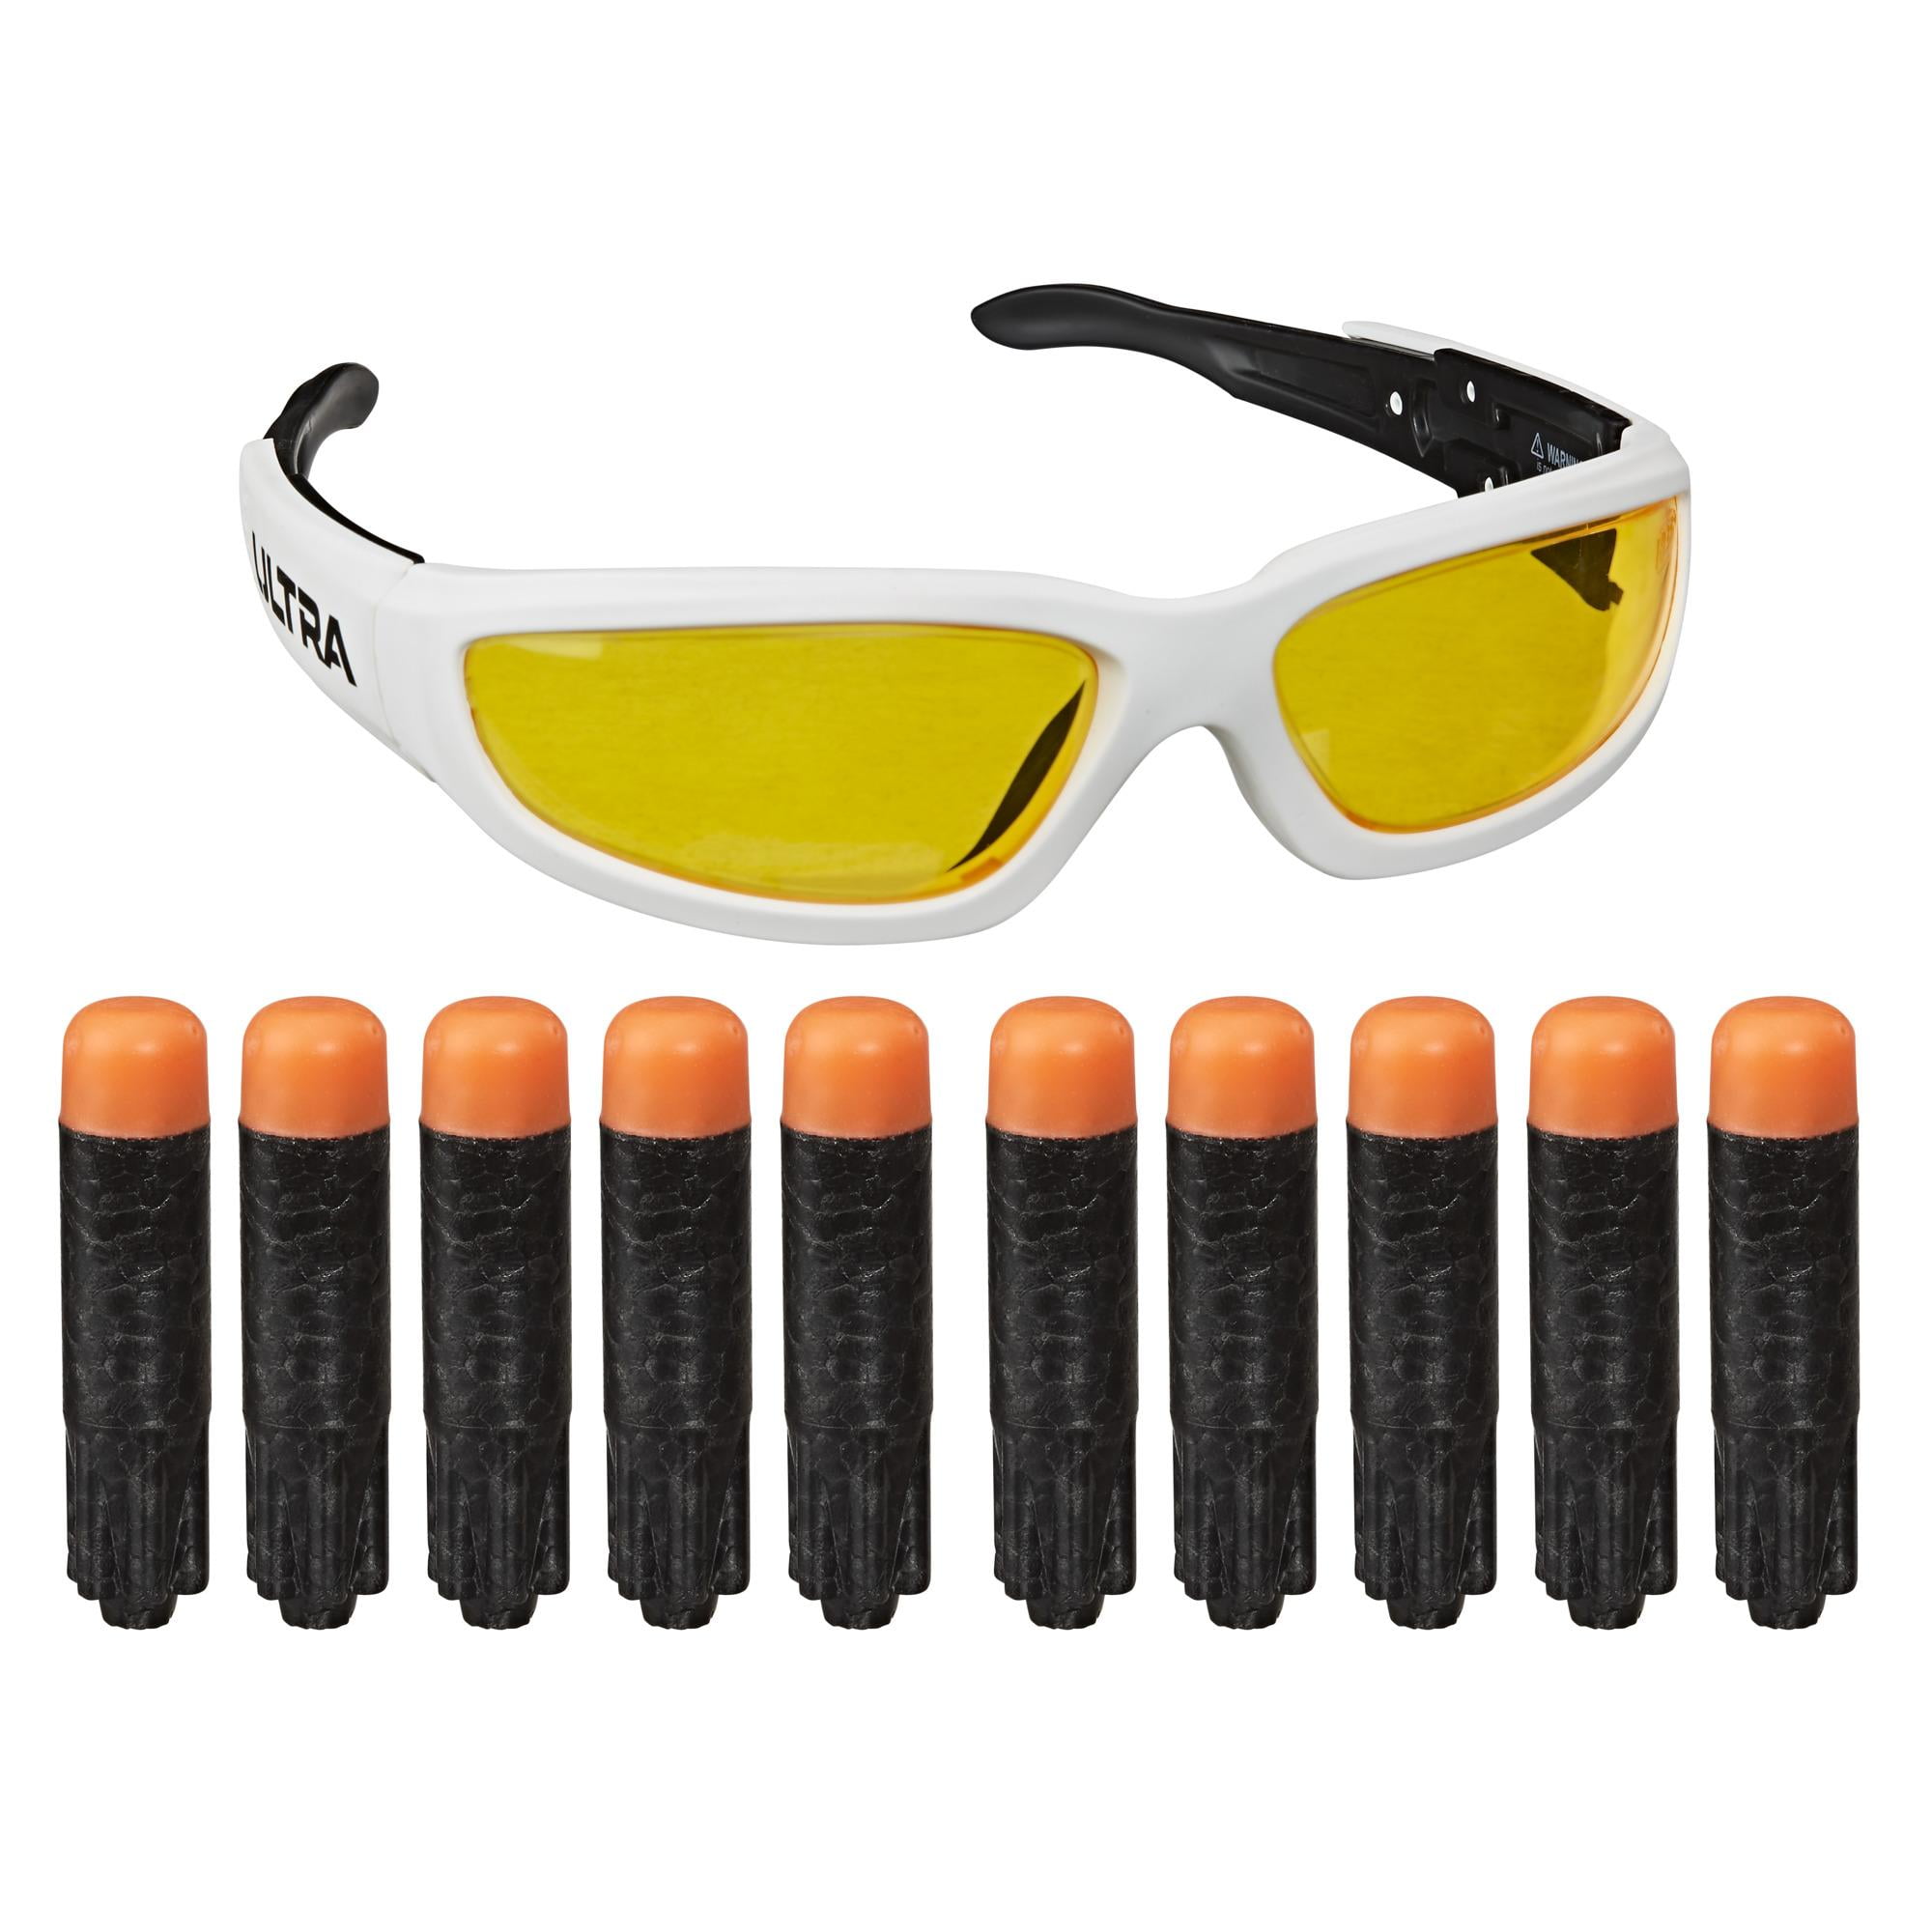 Nerf vision gear Colombia